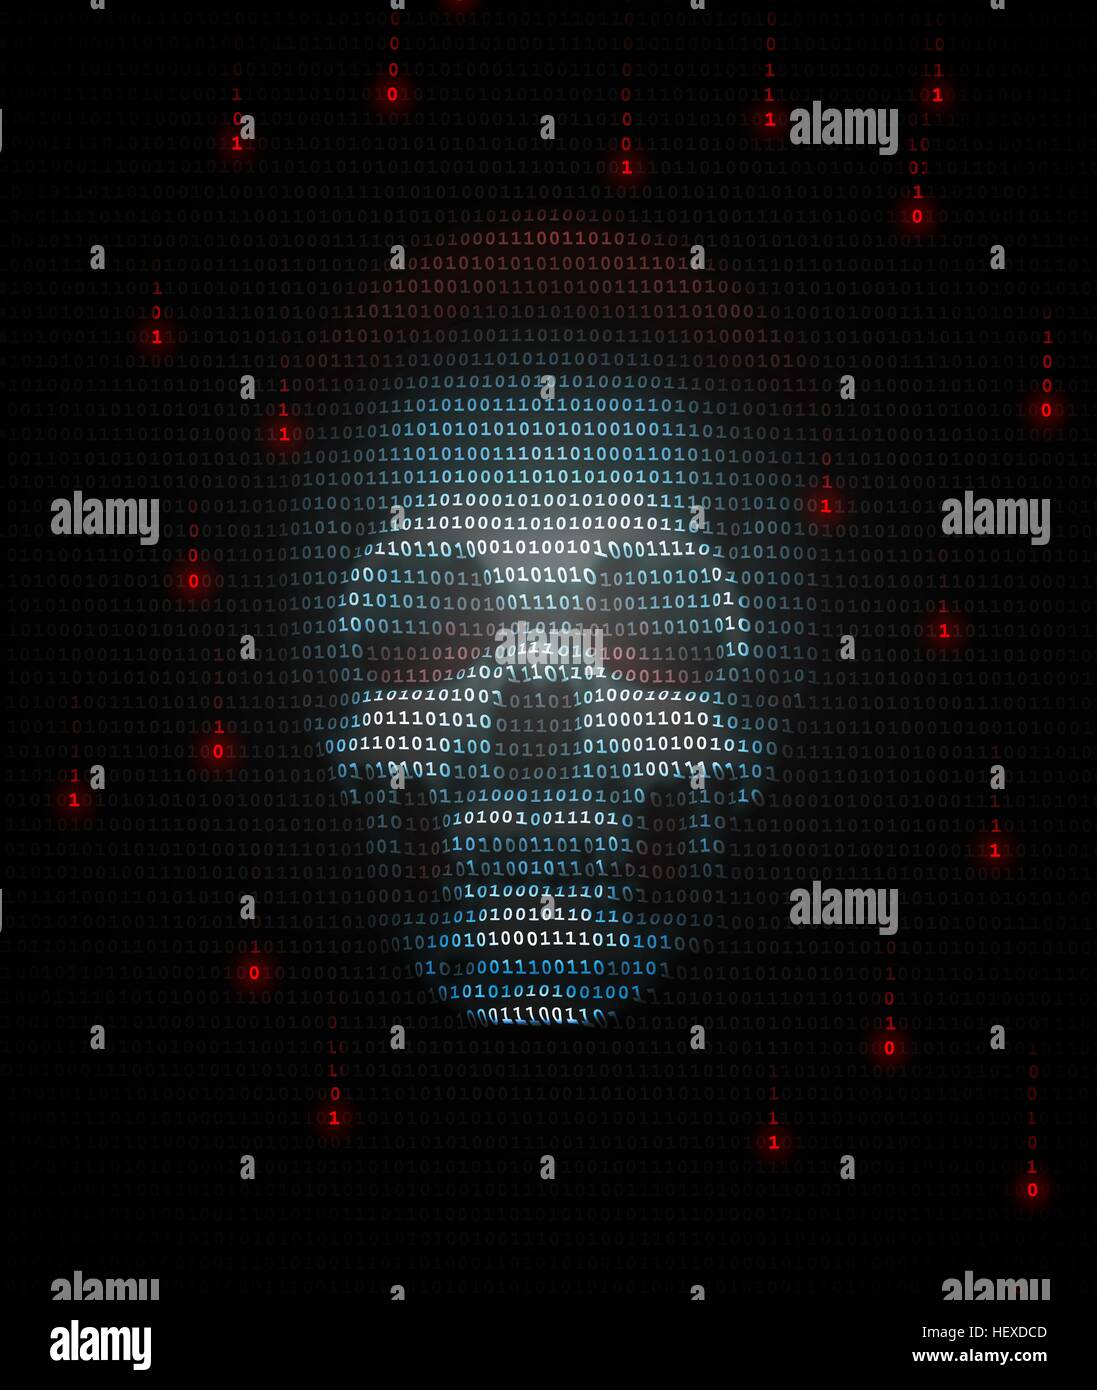 Computer virus, conceptual image. Computer viruses are computer programs that can carry out harmful instructions and copy themselves to other computers. In this image a skull represents a digital virus or trojan on a computer. The surrounding numbers are the ones and zeros of binary code. Stock Photo